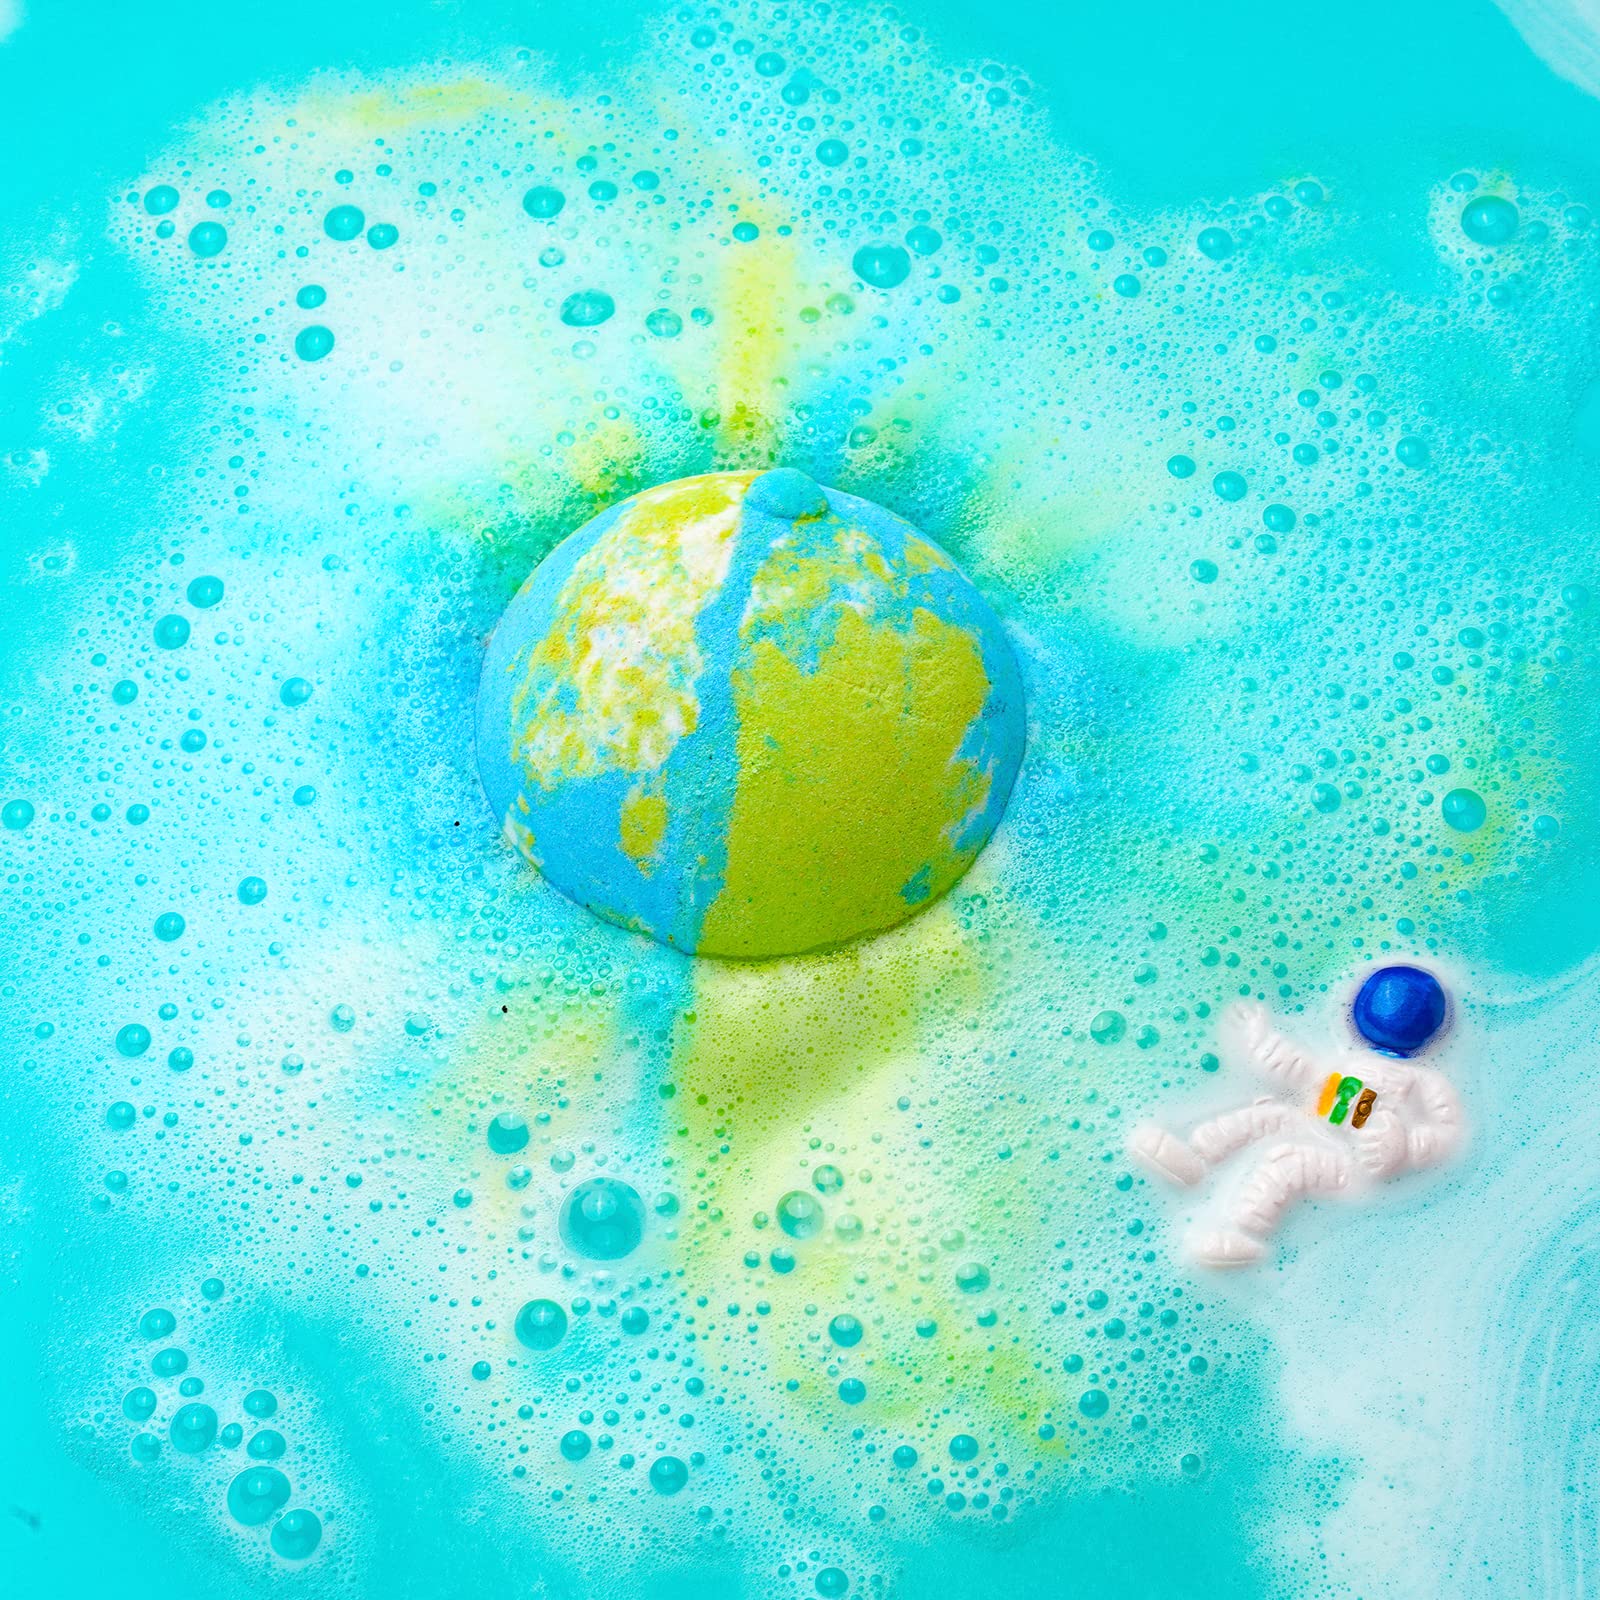 Daisy Encens Bath Bombs for Kids with Toys Inside - 12 Pack Bubble Bath Fizzies with Educational Outer Space Planet Surprises. Gentle and Kids Friendly Bubble Bath Fizzy, Birthday Gift for Boys, Girls